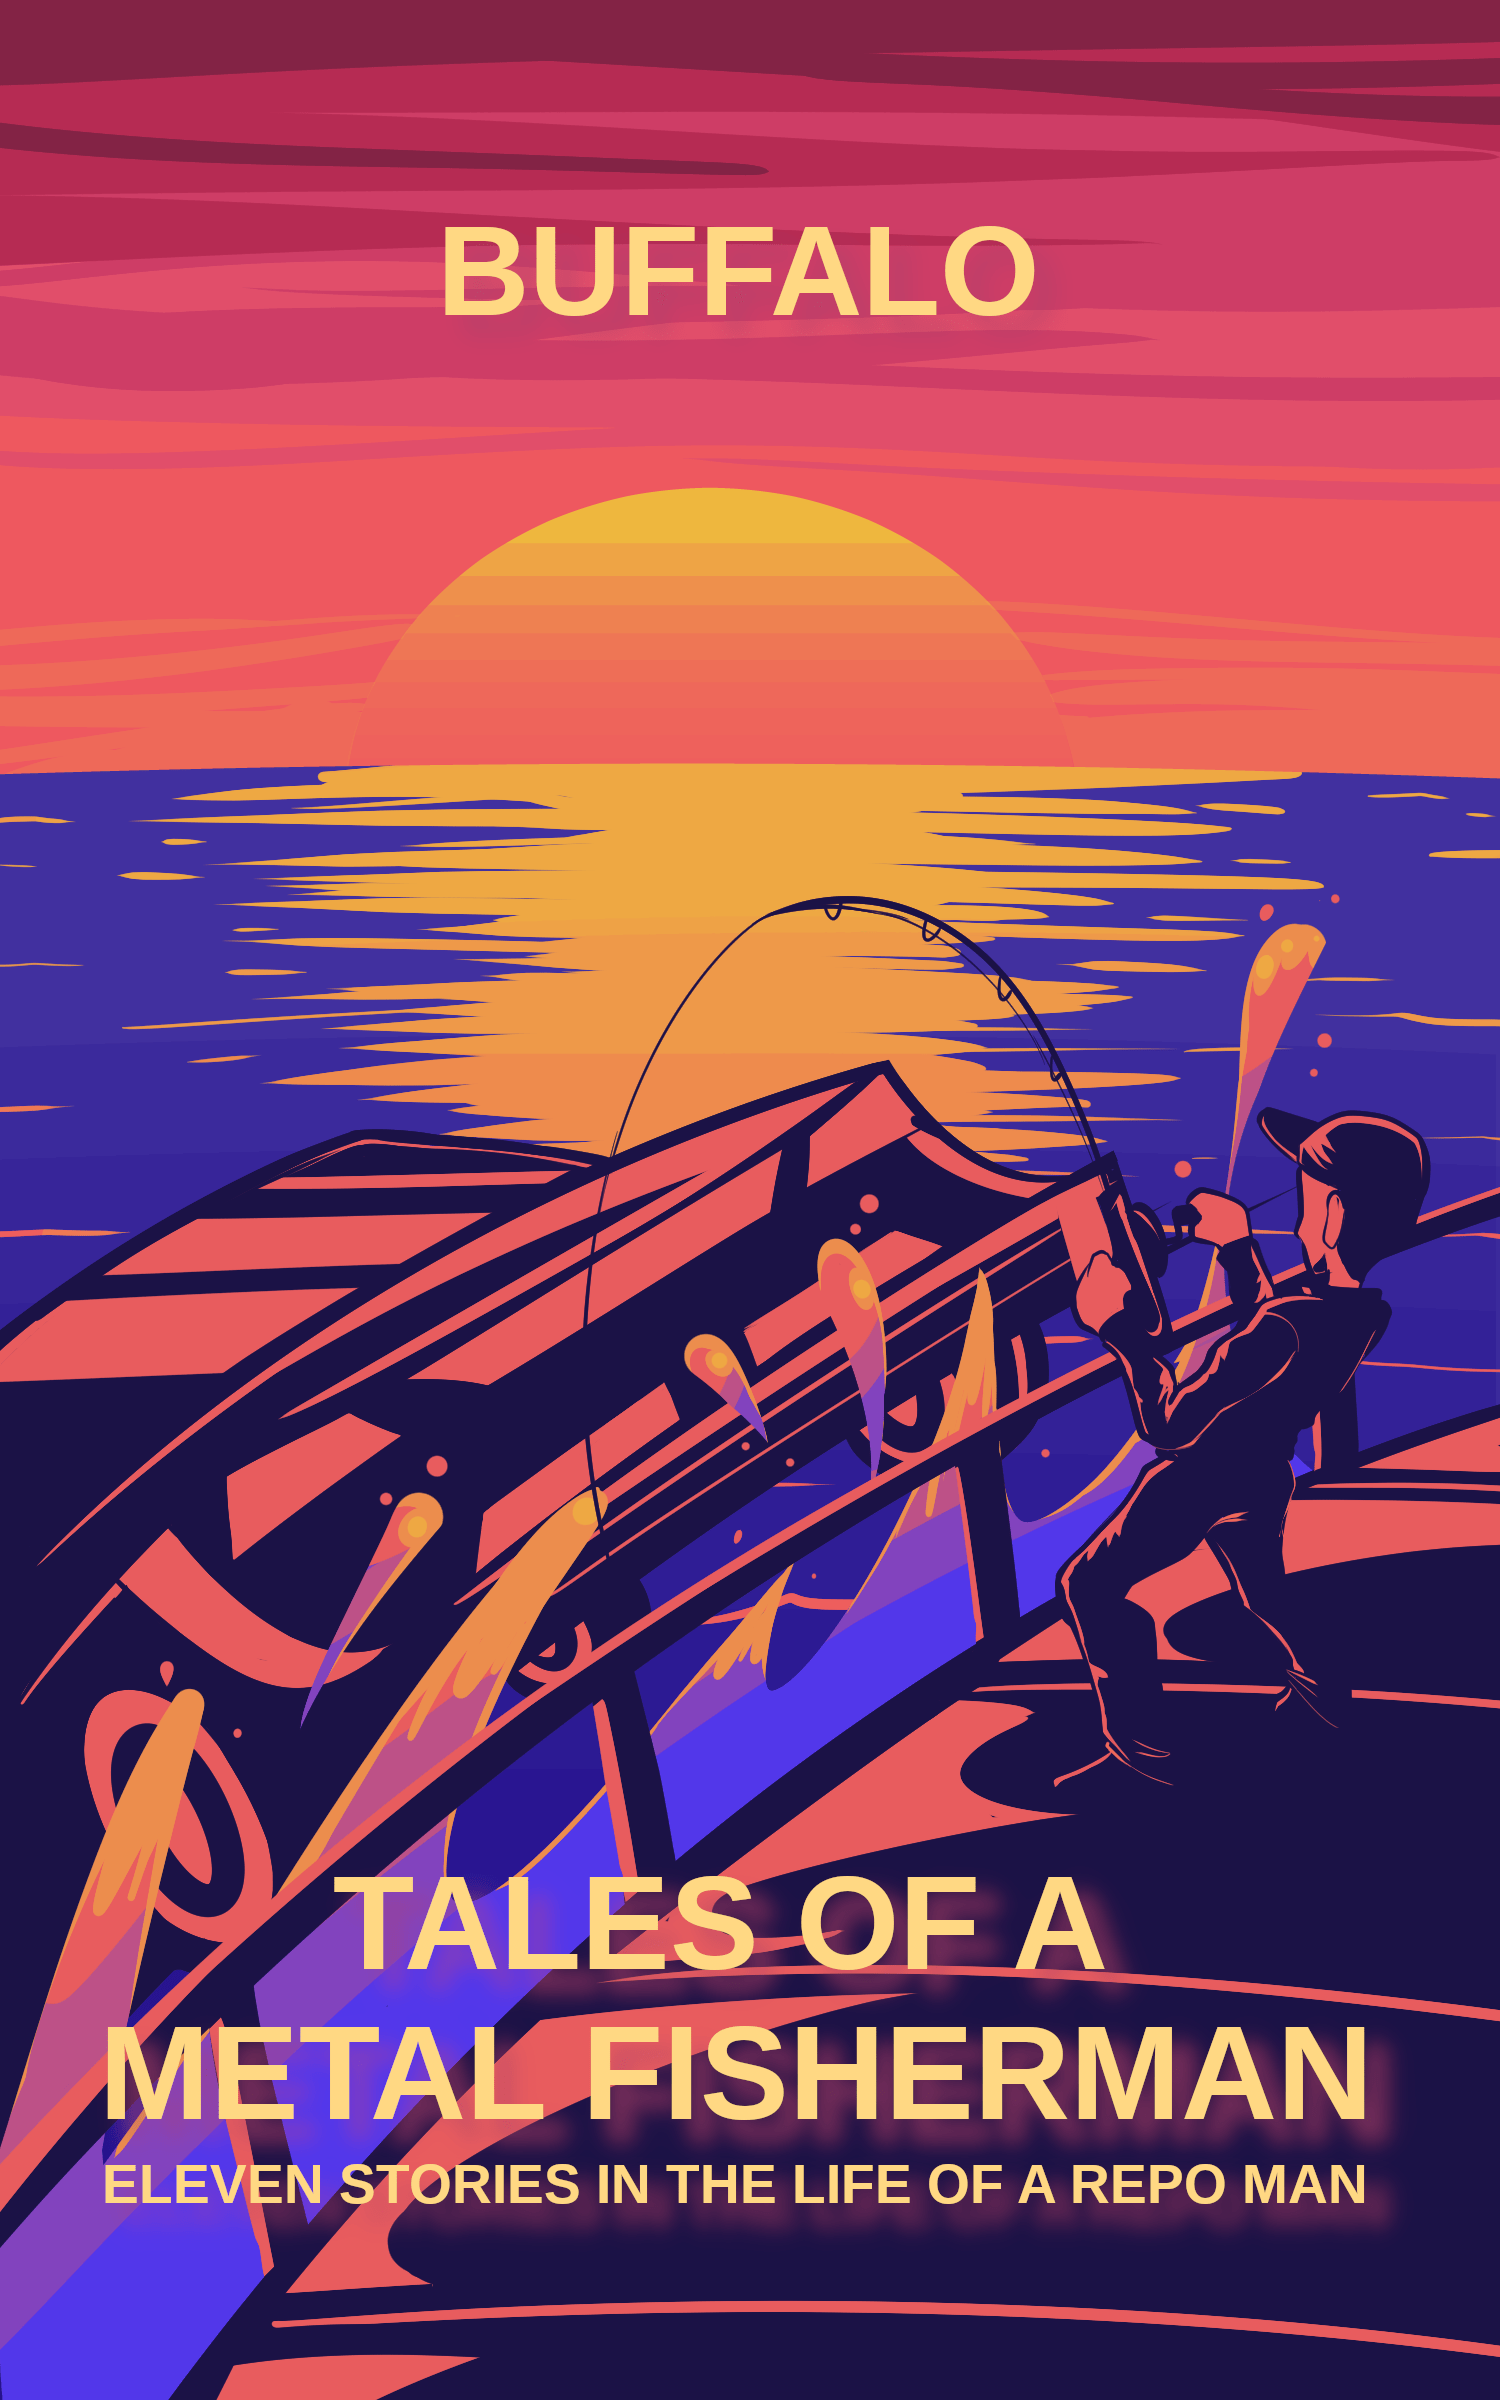 Cover of Tales of a Metal Fisherman by Buffalo, illustration by Chris Jacobs, showing a man reeling in a car from the water on a sunset-laden pier.